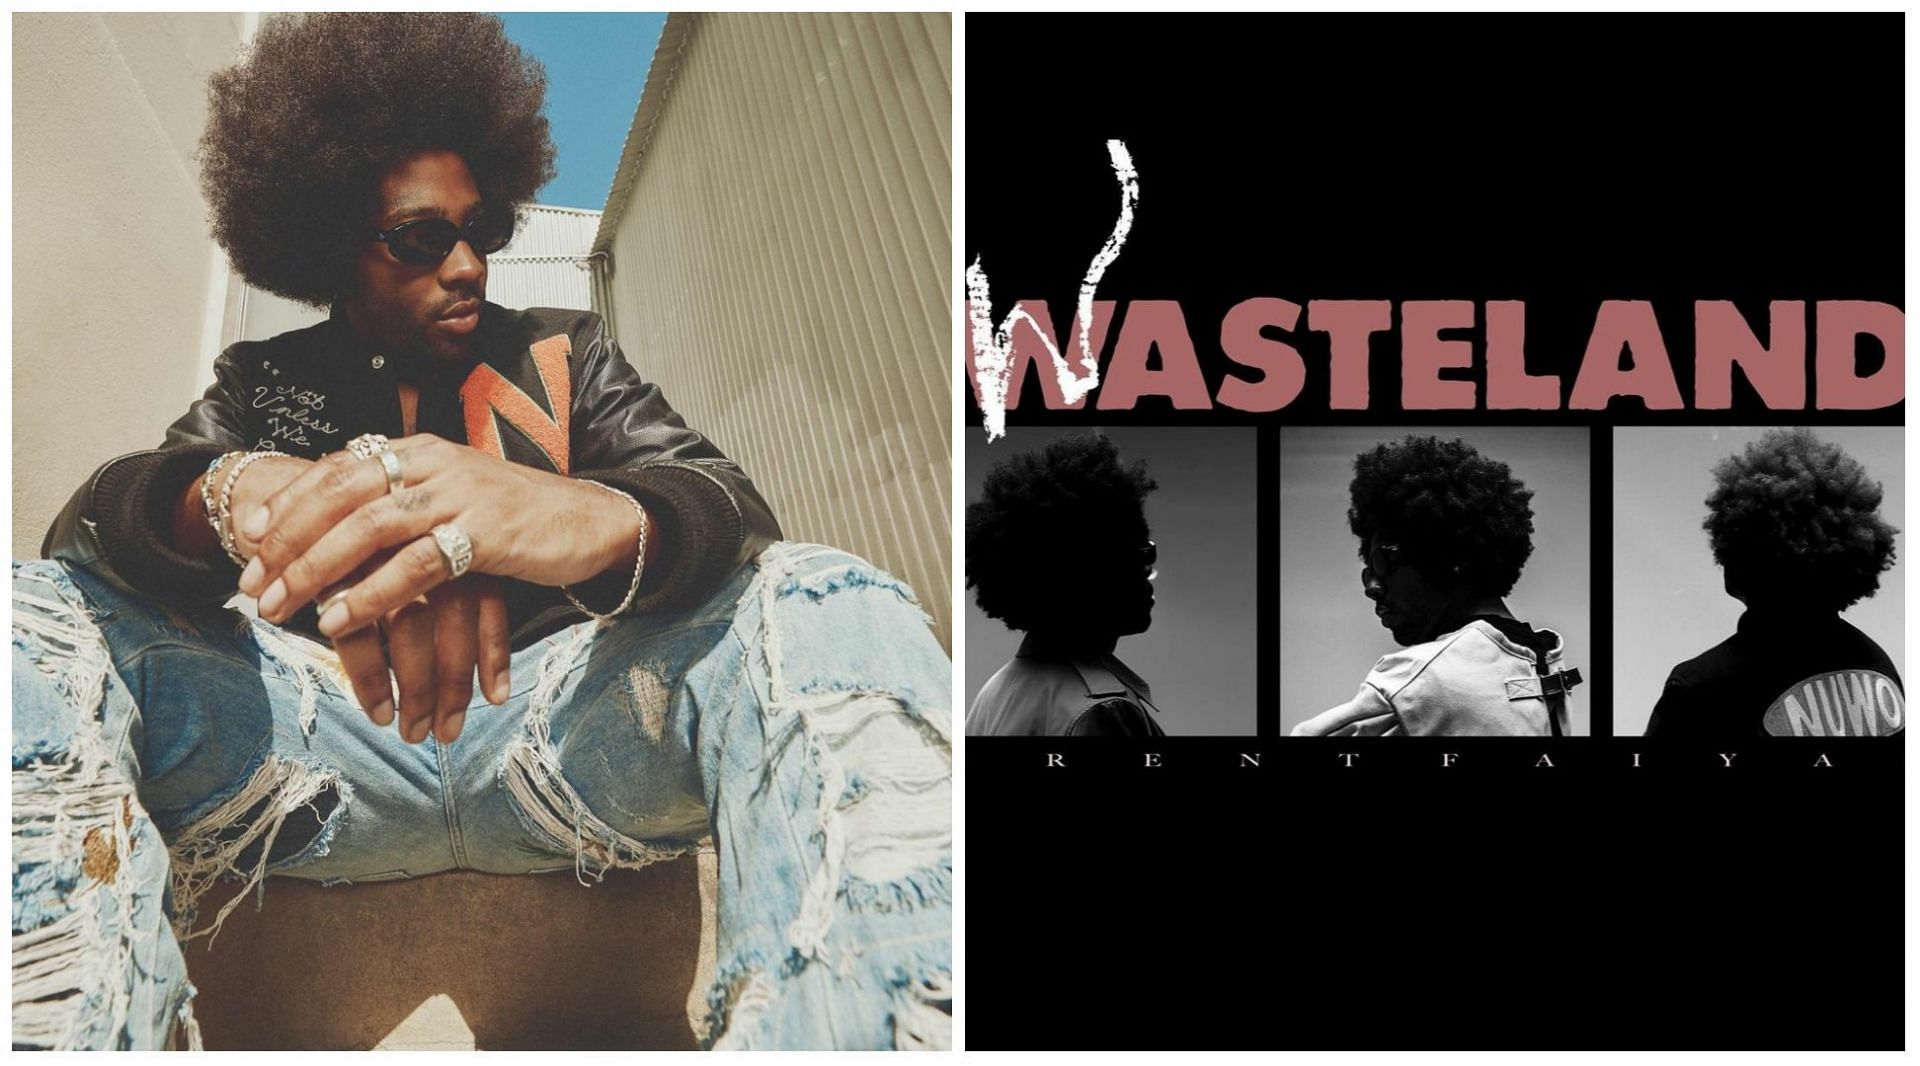 Brent Faiyaz&#039;s Wasteland: A gorgeously sung yet lyrically twisted story, and another win for the R&amp;B rennaissance. (Images via Instagram @brentfaiyaz)